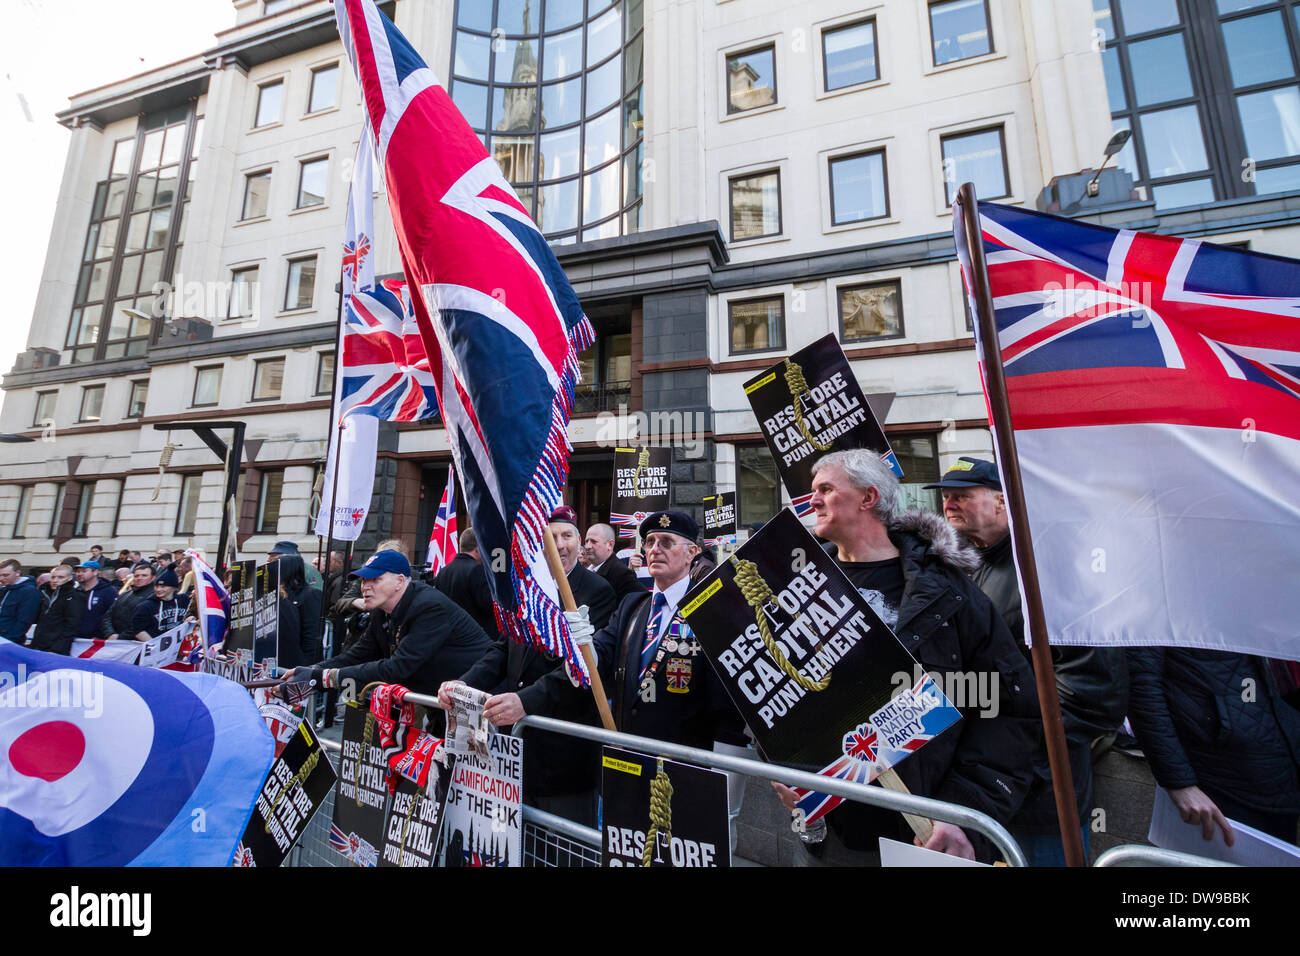 British Far-Right Nationalist groups outside Old Bailey court in London ...